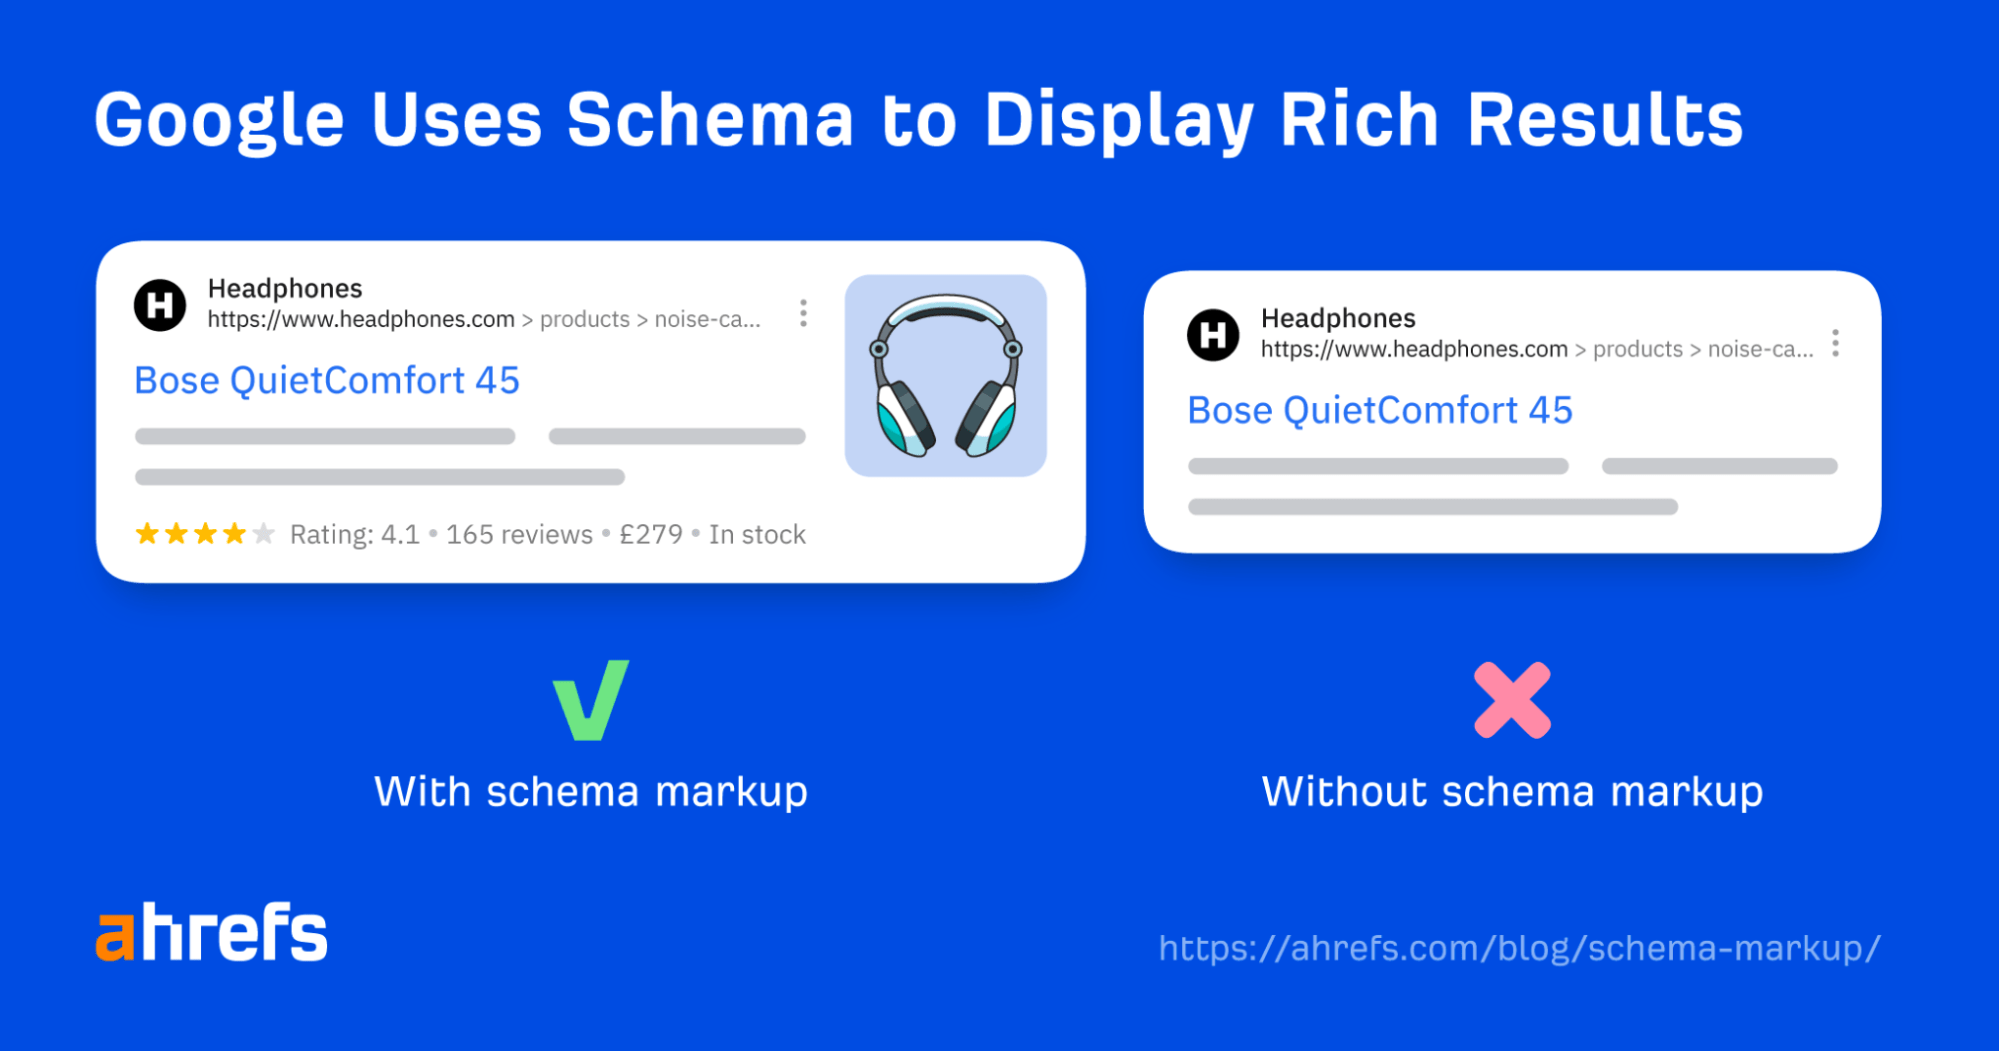 Google uses schema to display rich results.